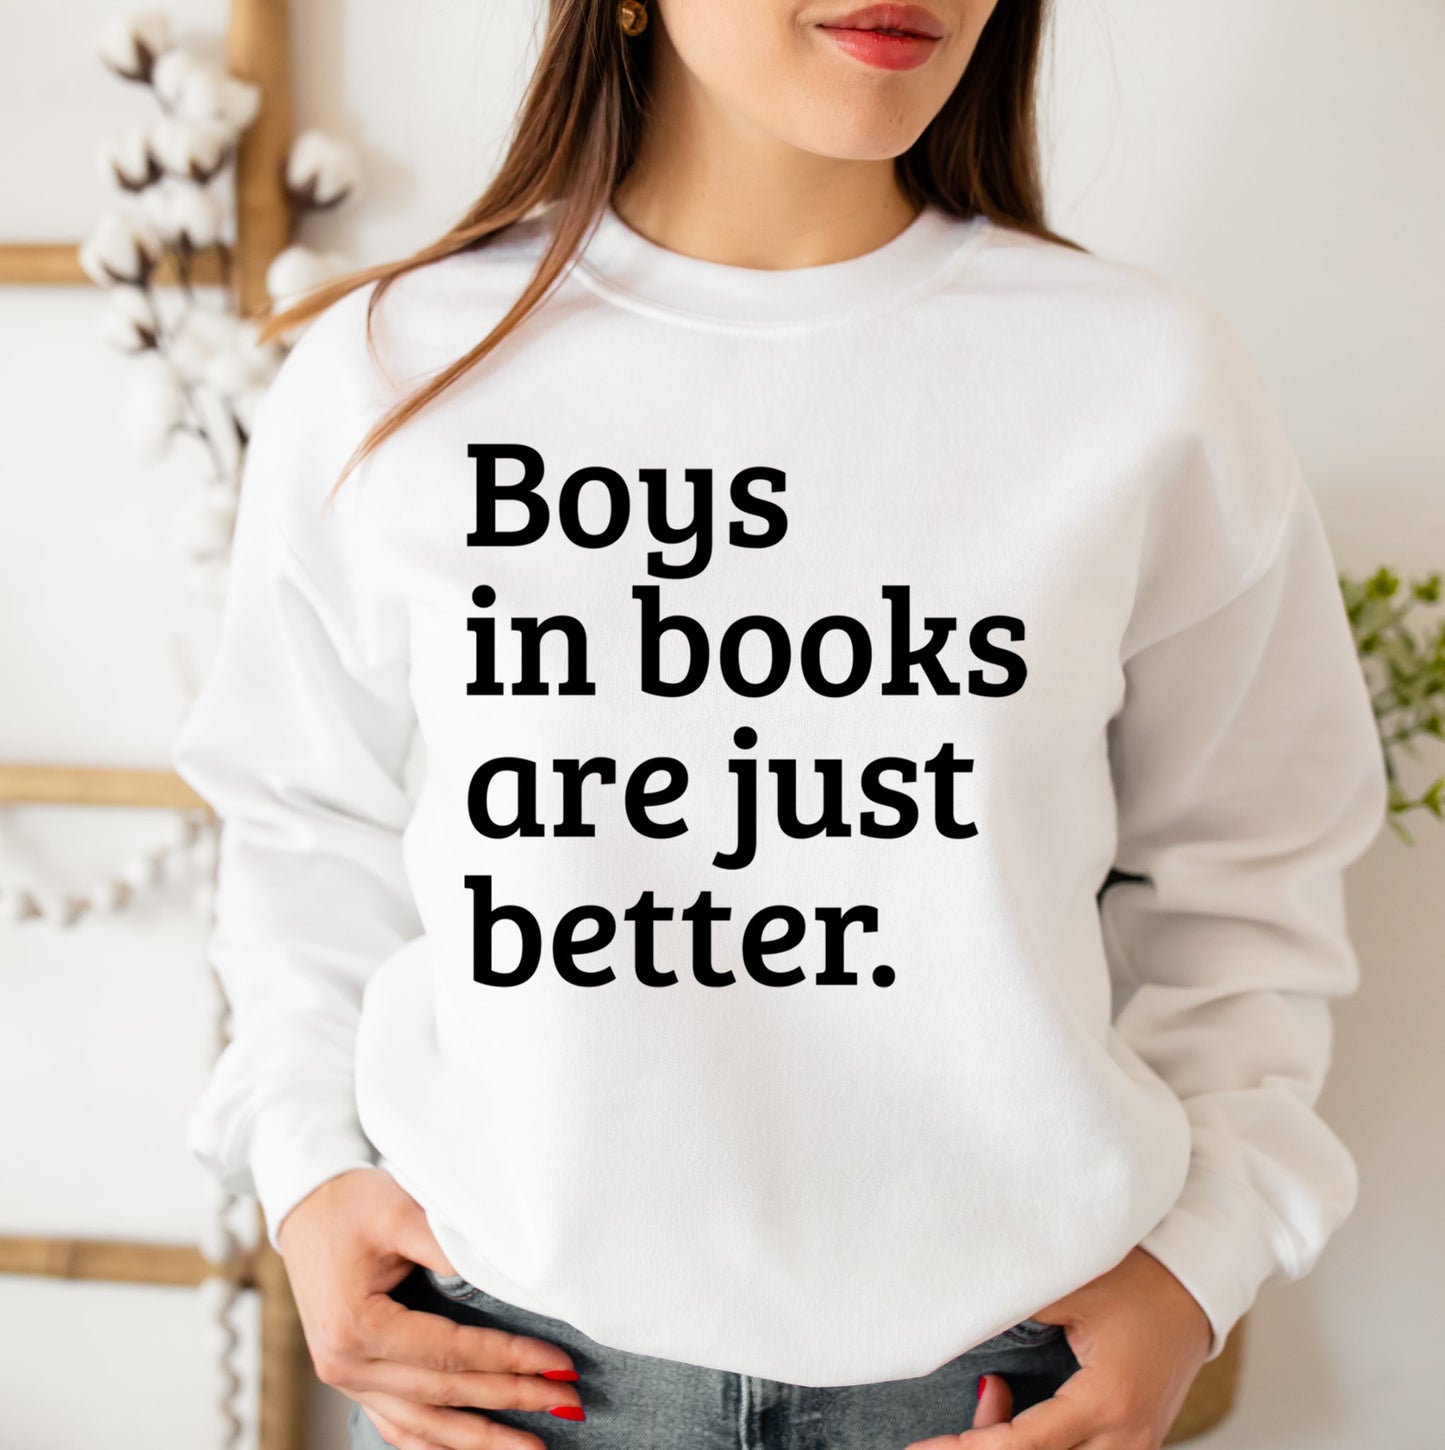 Boys in books are just better